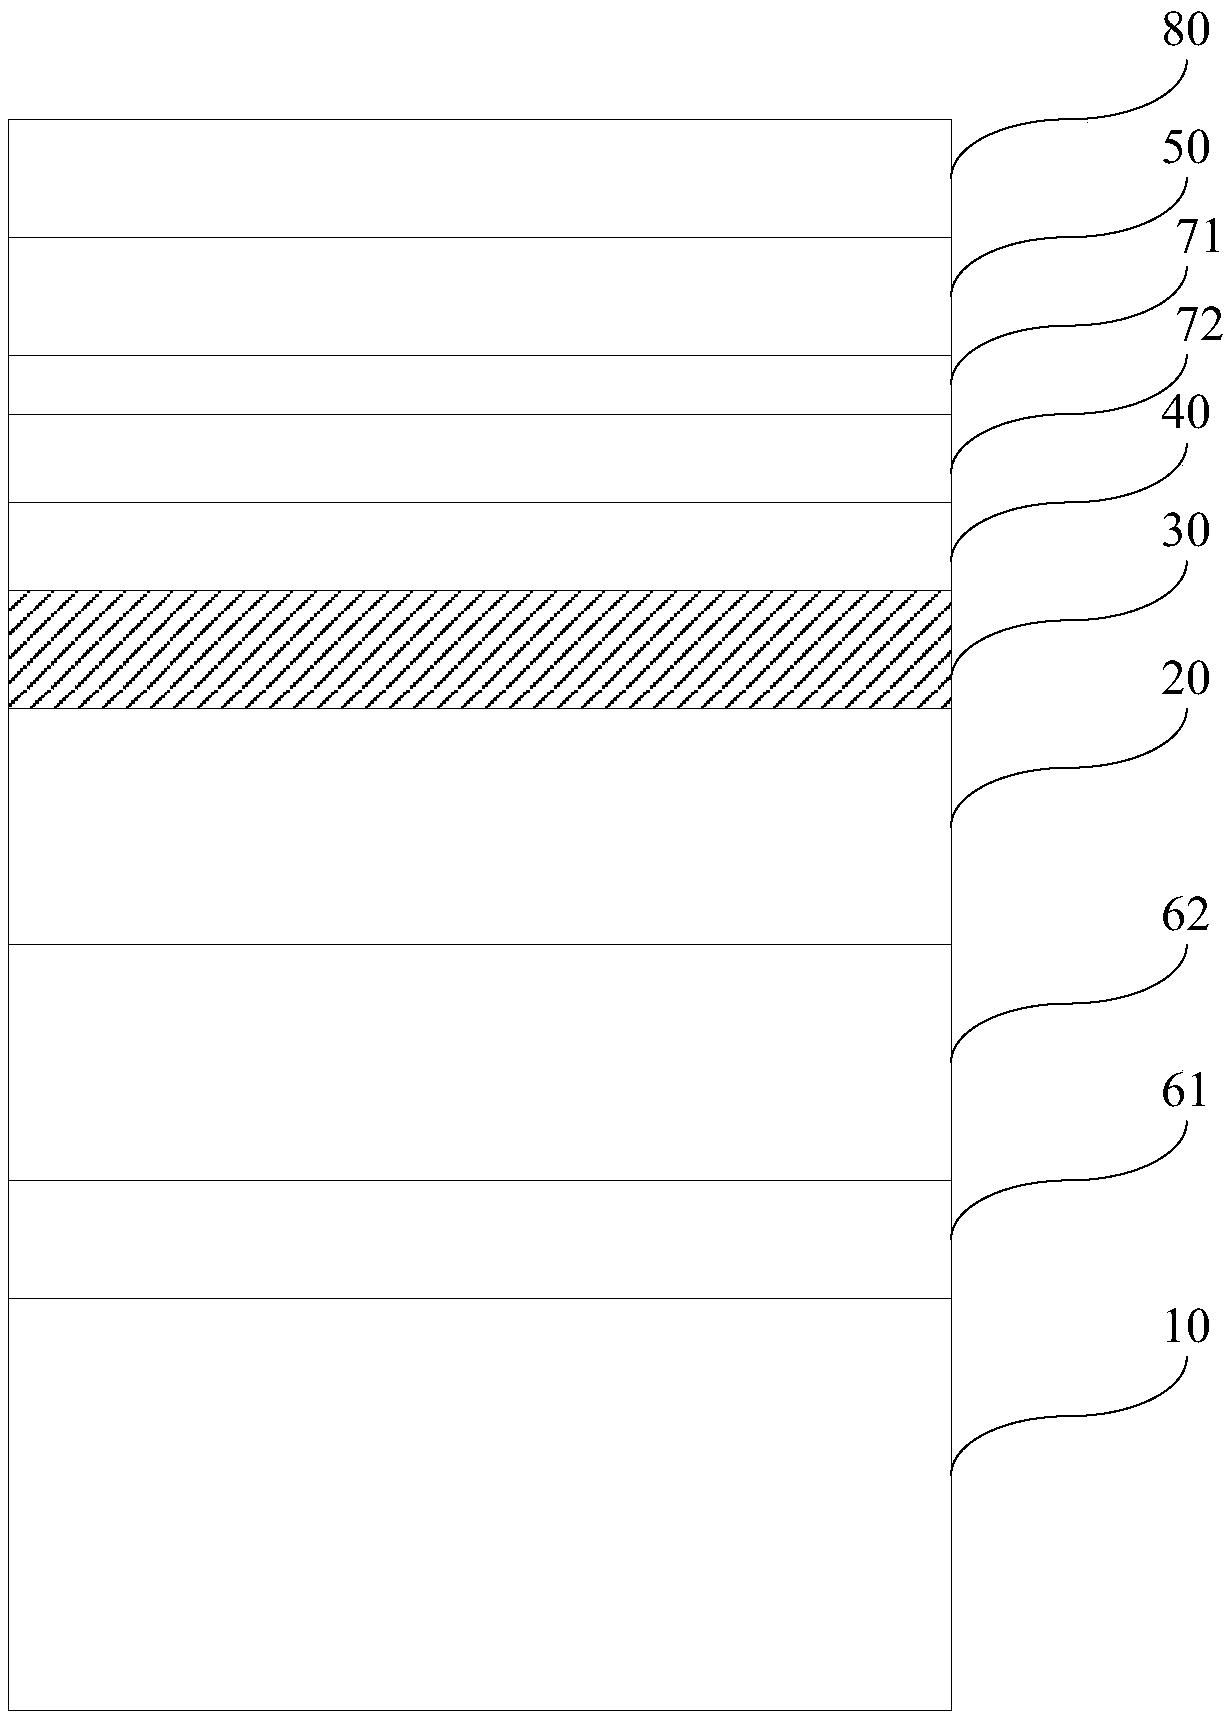 Light-emitting diode epitaxial wafer and preparation method thereof